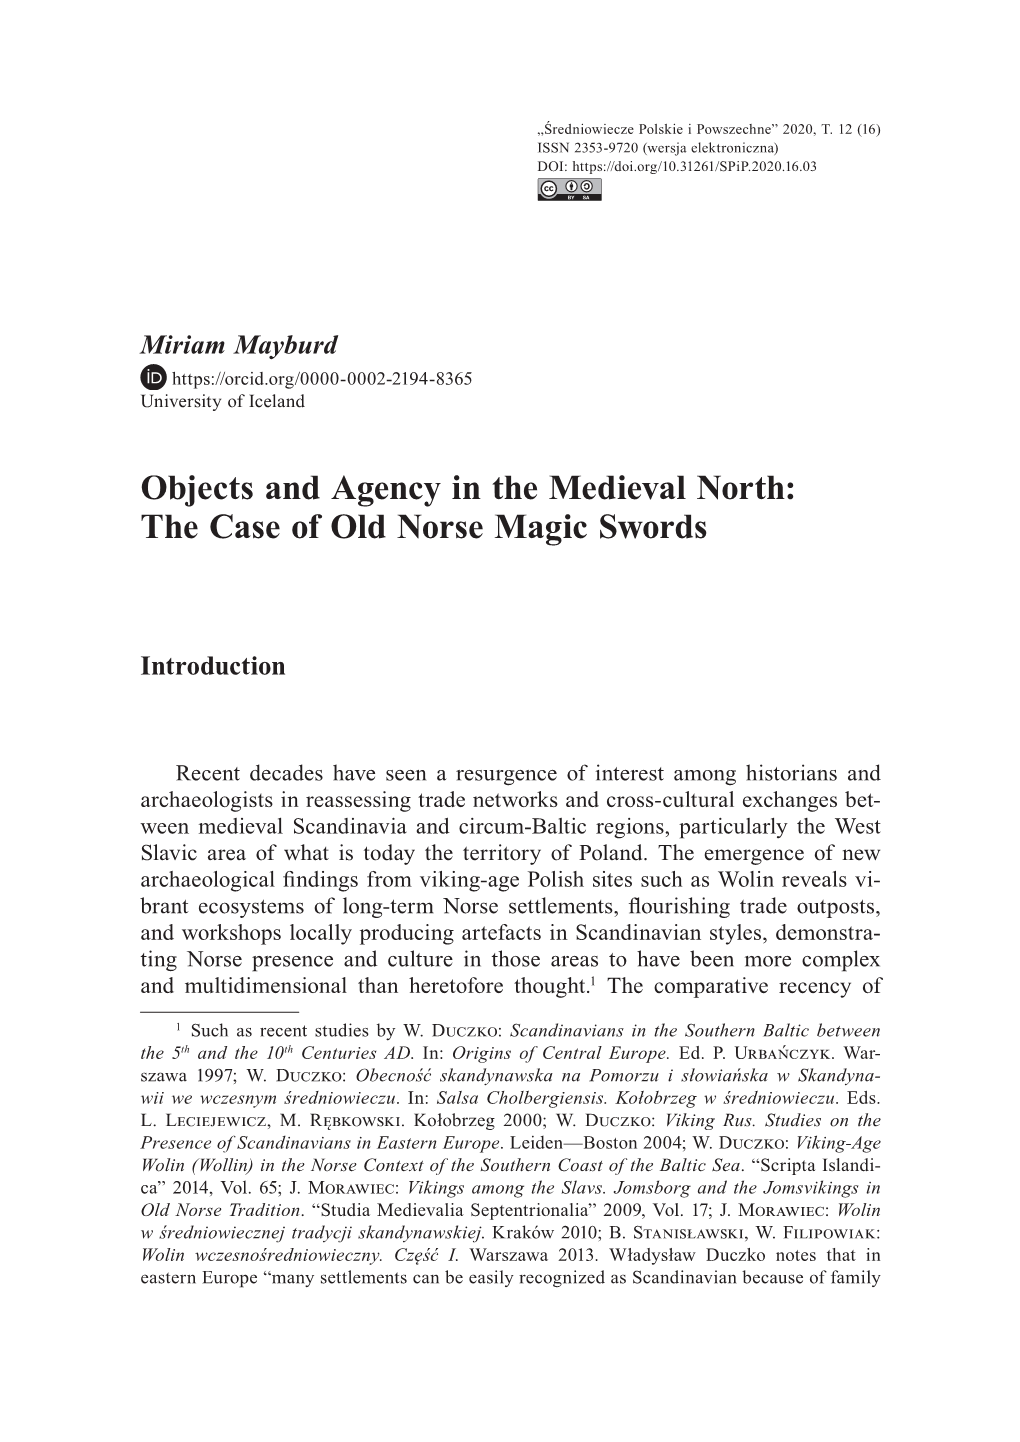 Objects and Agency in the Medieval North: the Case of Old Norse Magic Swords